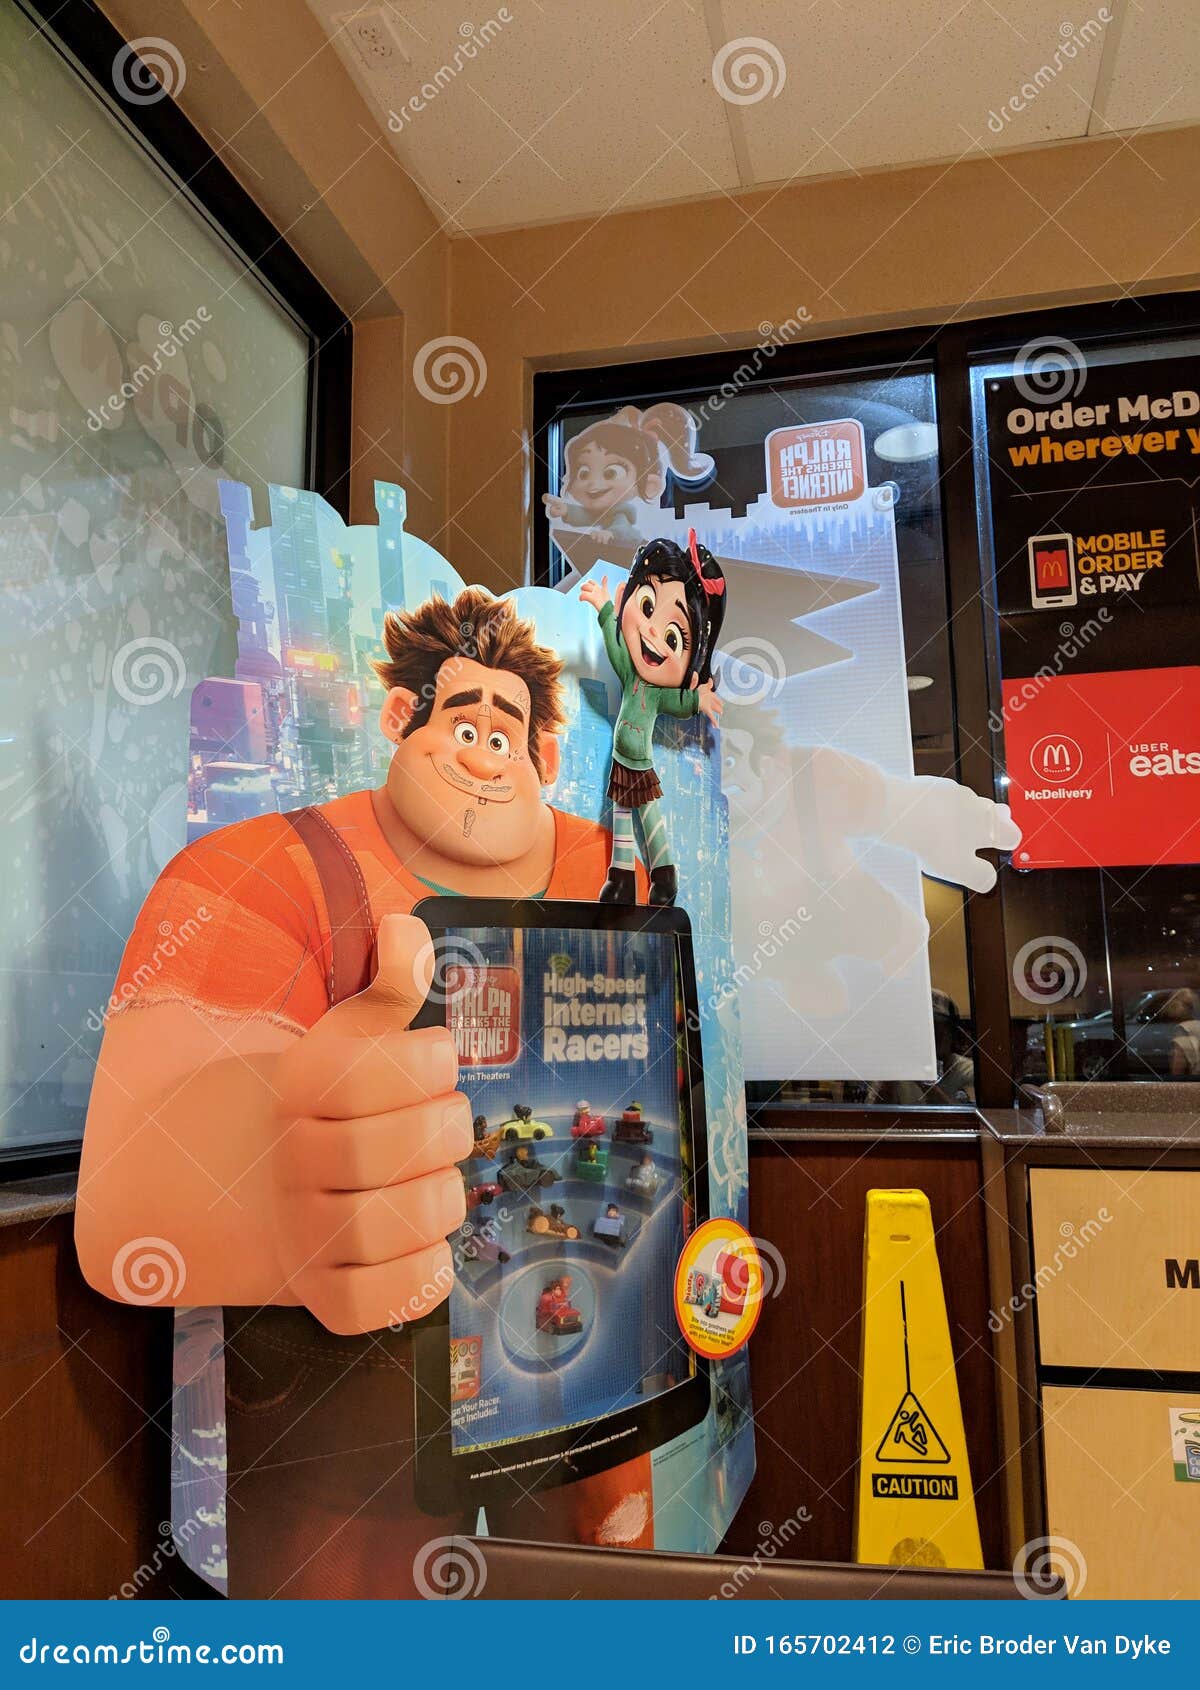 NEW Ralph Breaks The Internet Details about   McDonald's Happy Meal Toys UNOPENED 